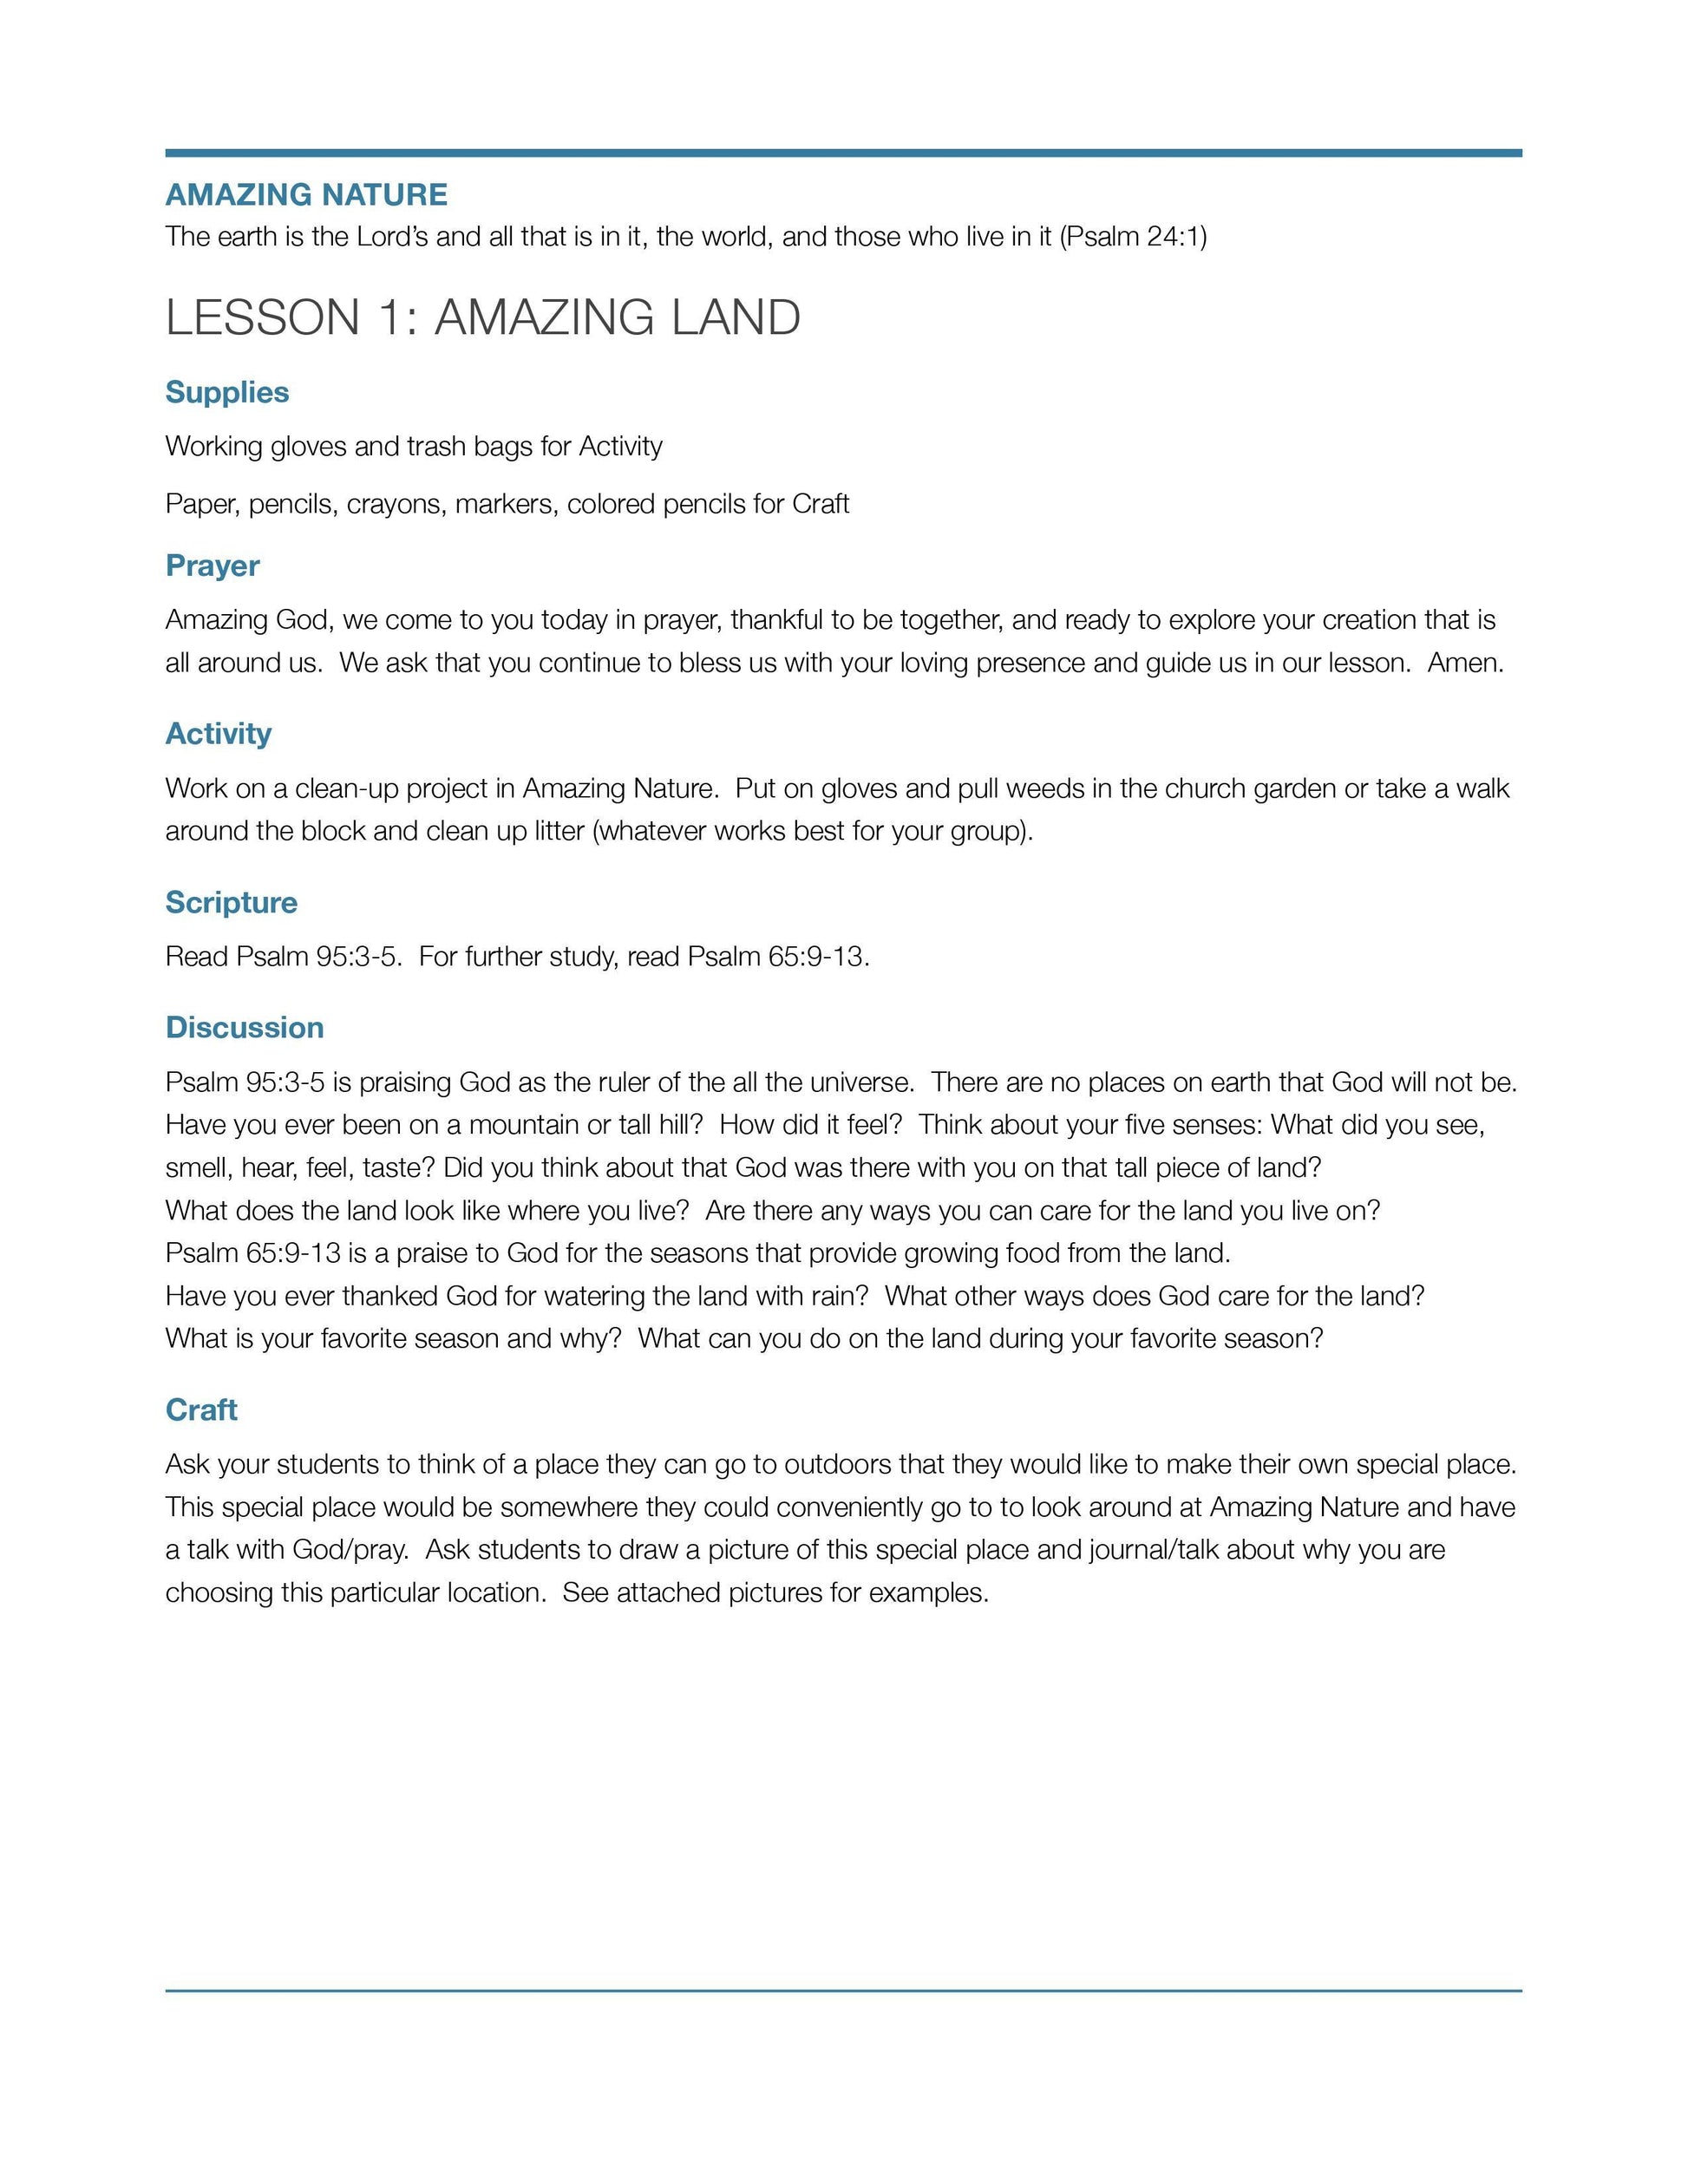 Amazing Nature: 7-Lesson Sunday School Curriculum (download only) - Sunday School Store 